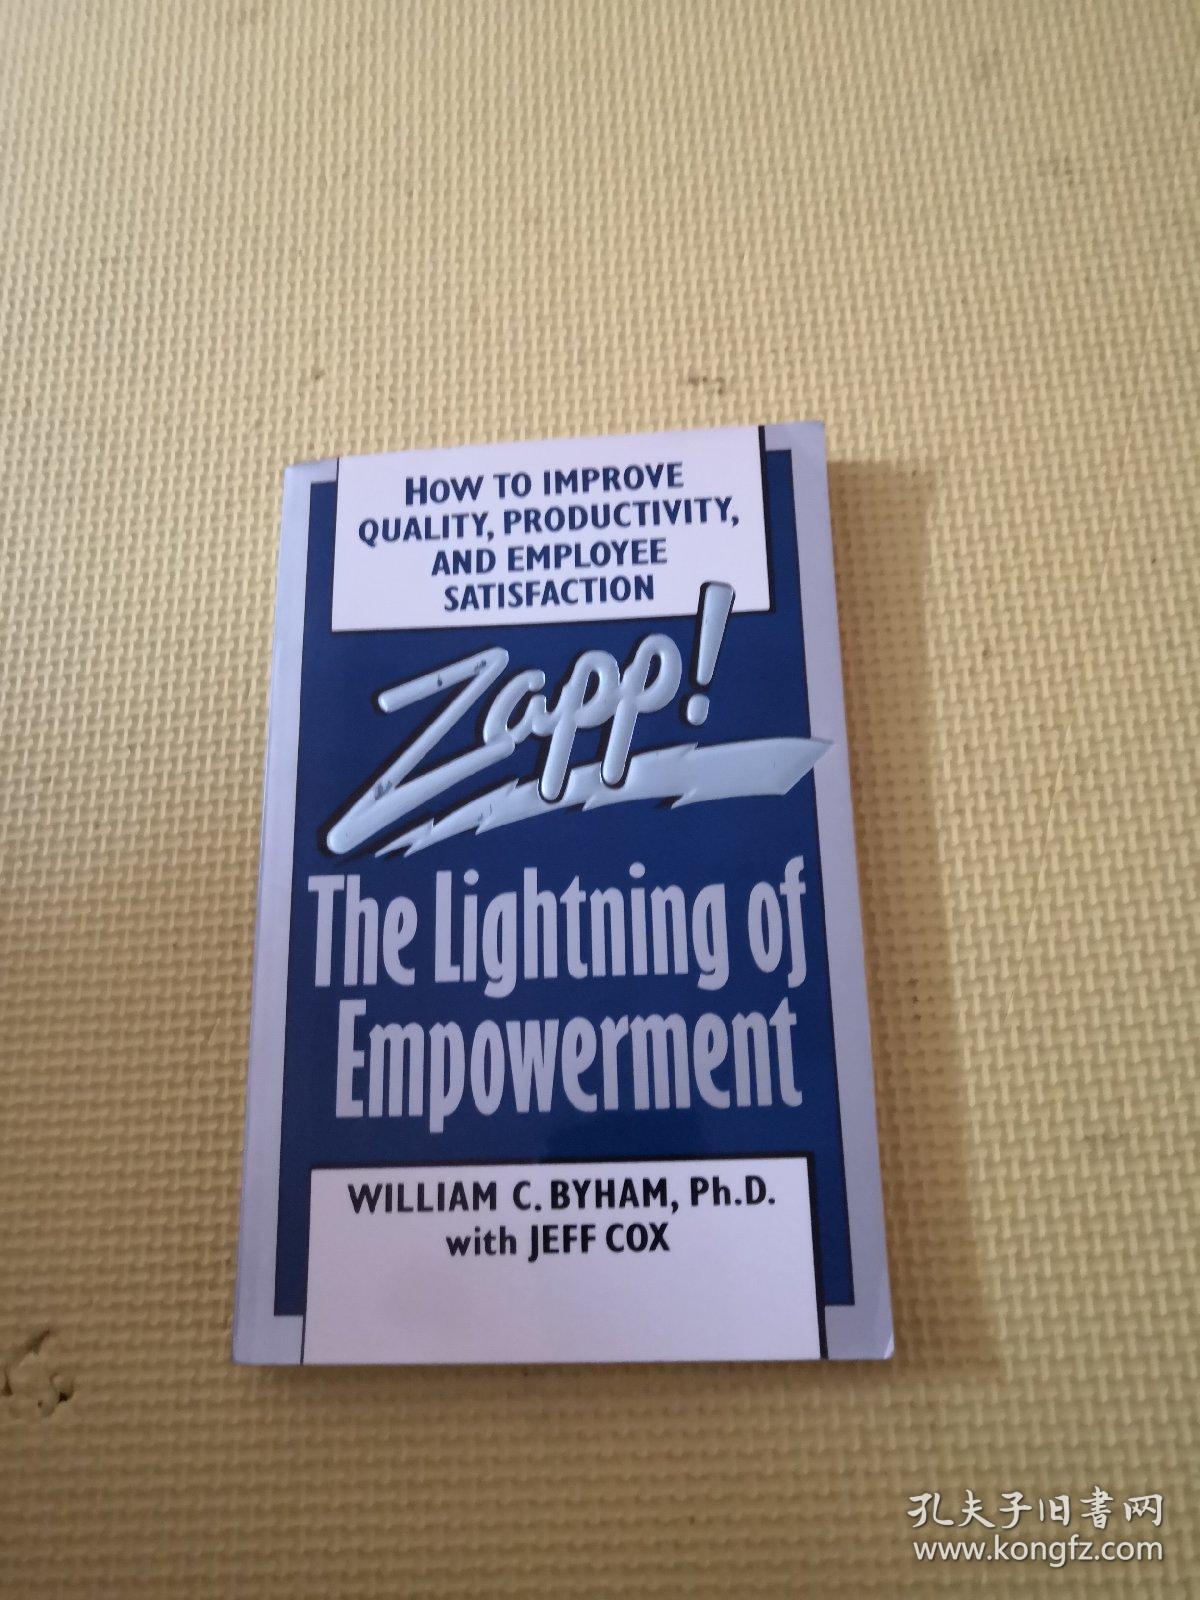 Zapp! The Lightning Of Empowerment: How To Improve Quality, Productivity, And Employee Satisfaction.